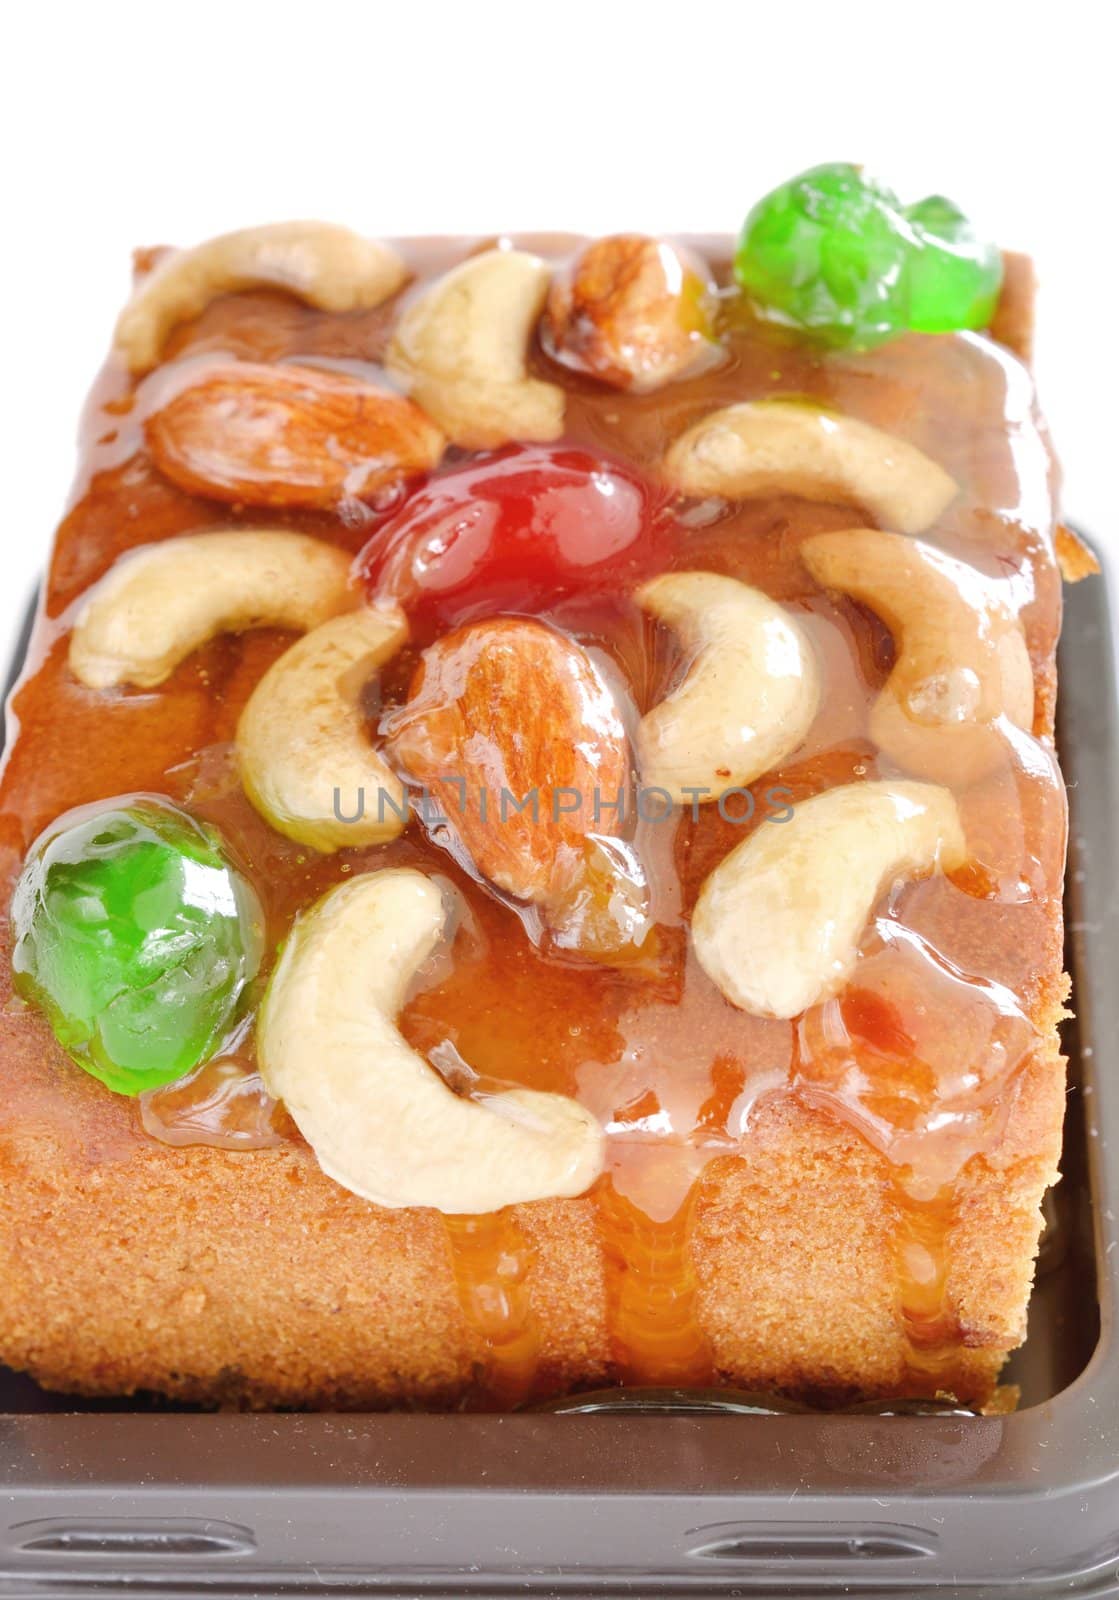 fruits cake with mix nut and dried fruit on white background